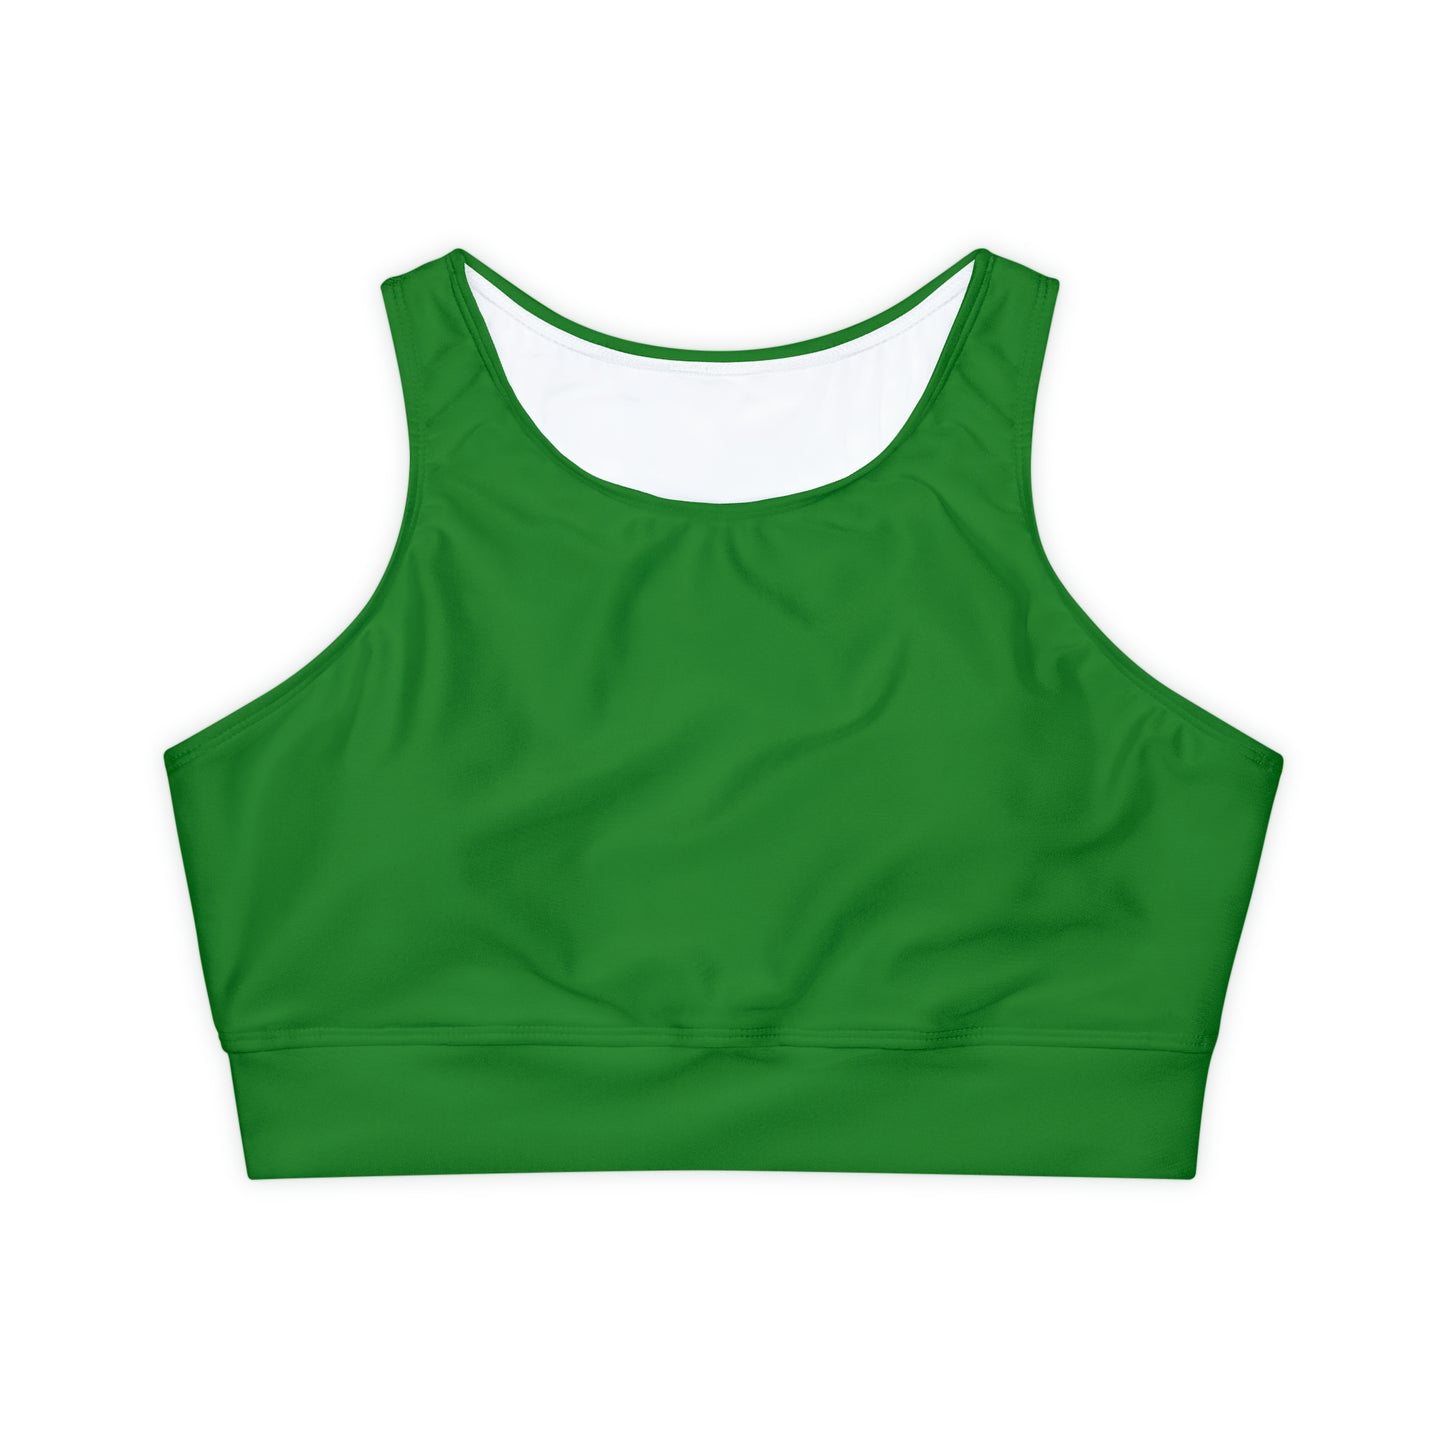 Forest Green Fully Lined, Padded Sports Bra